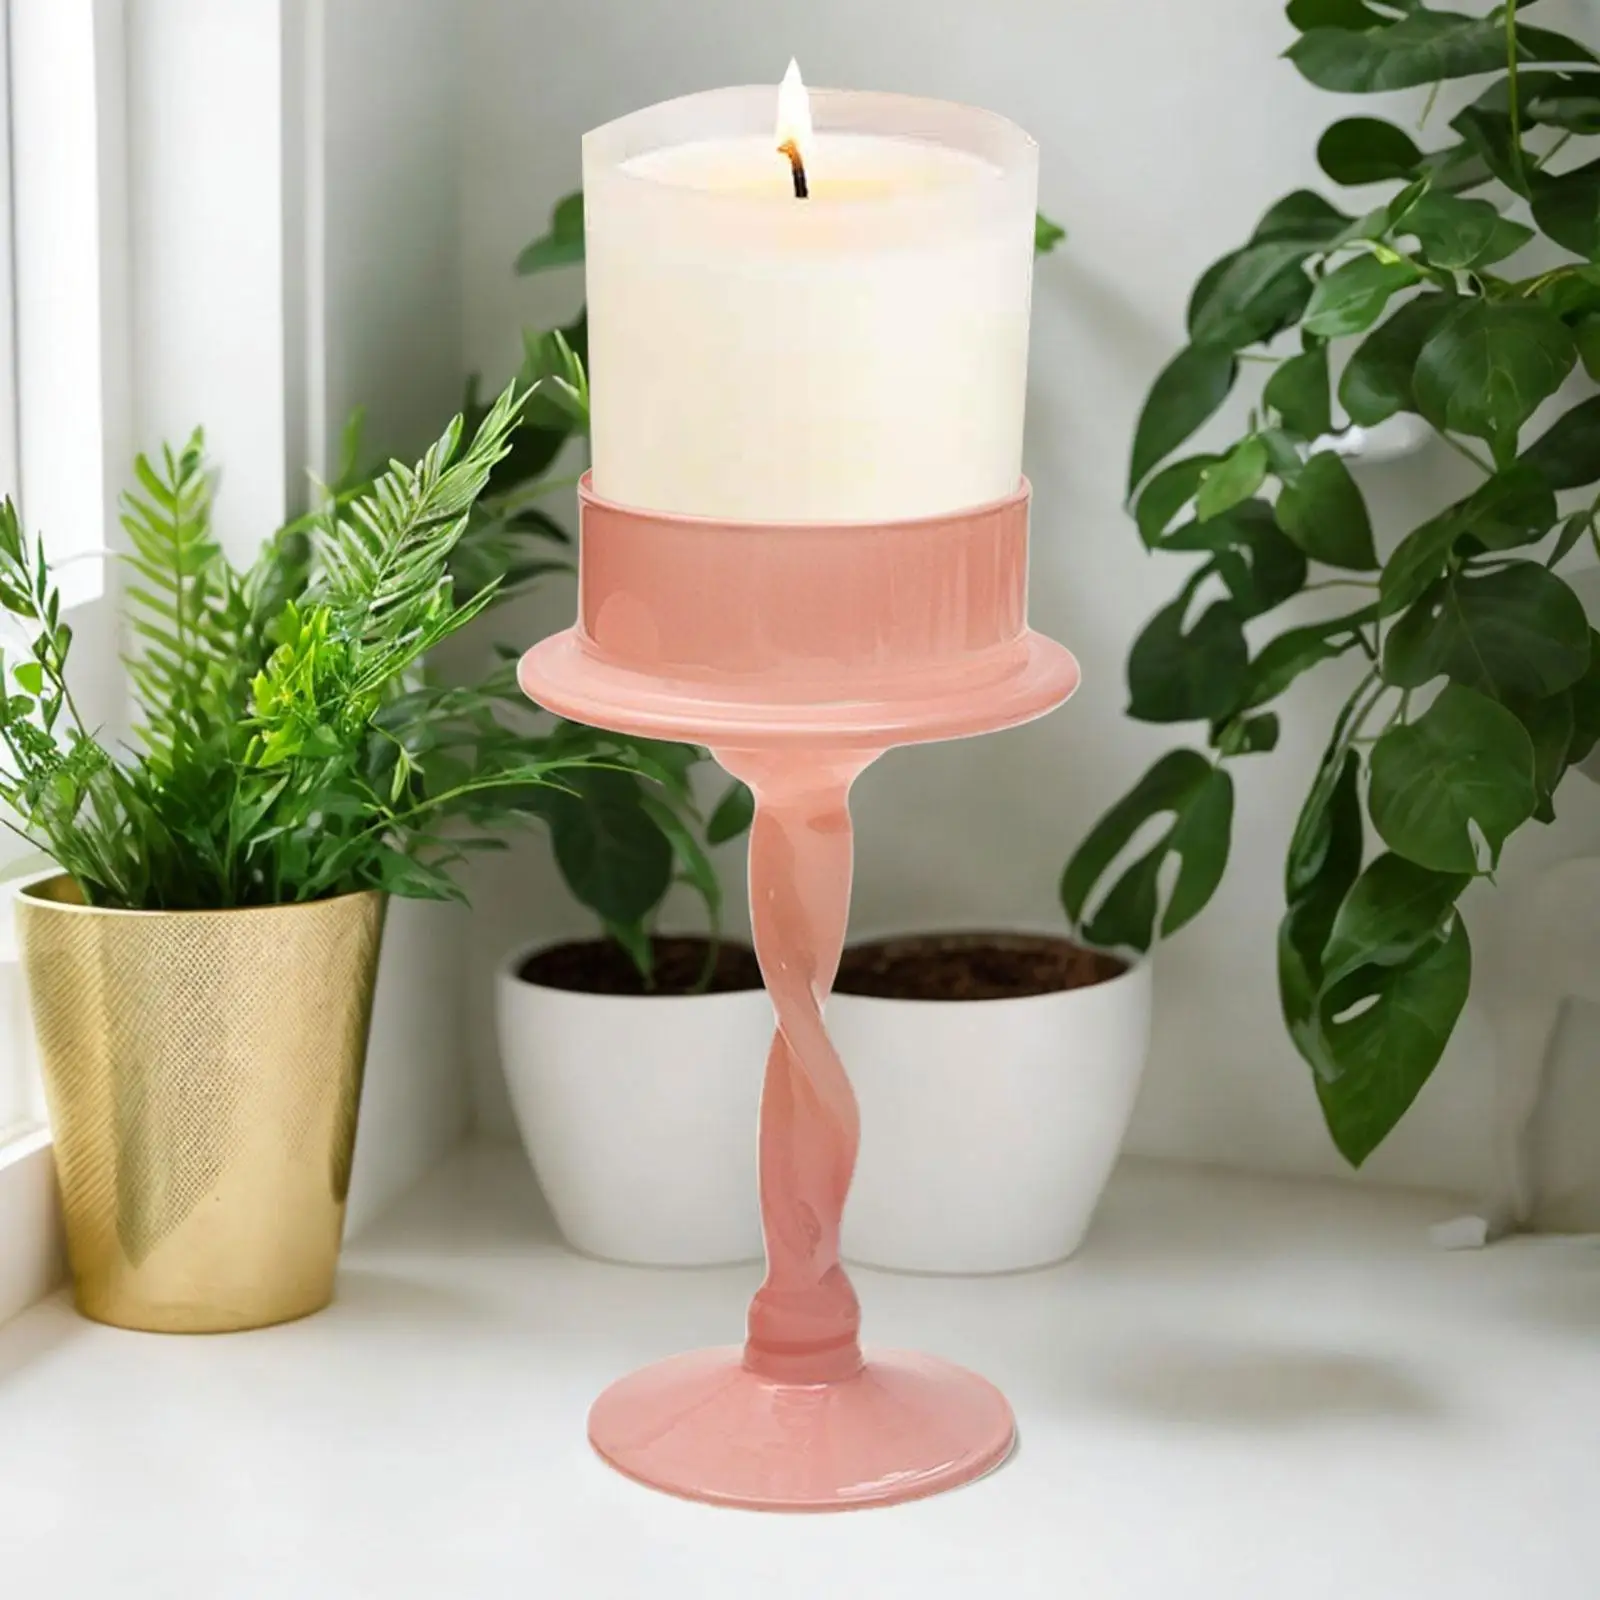 Candleholder for Pillar Candle Glass Candlestick Holder for Dining Room Wedding Centerpieces Thanksgiving Living Room Home